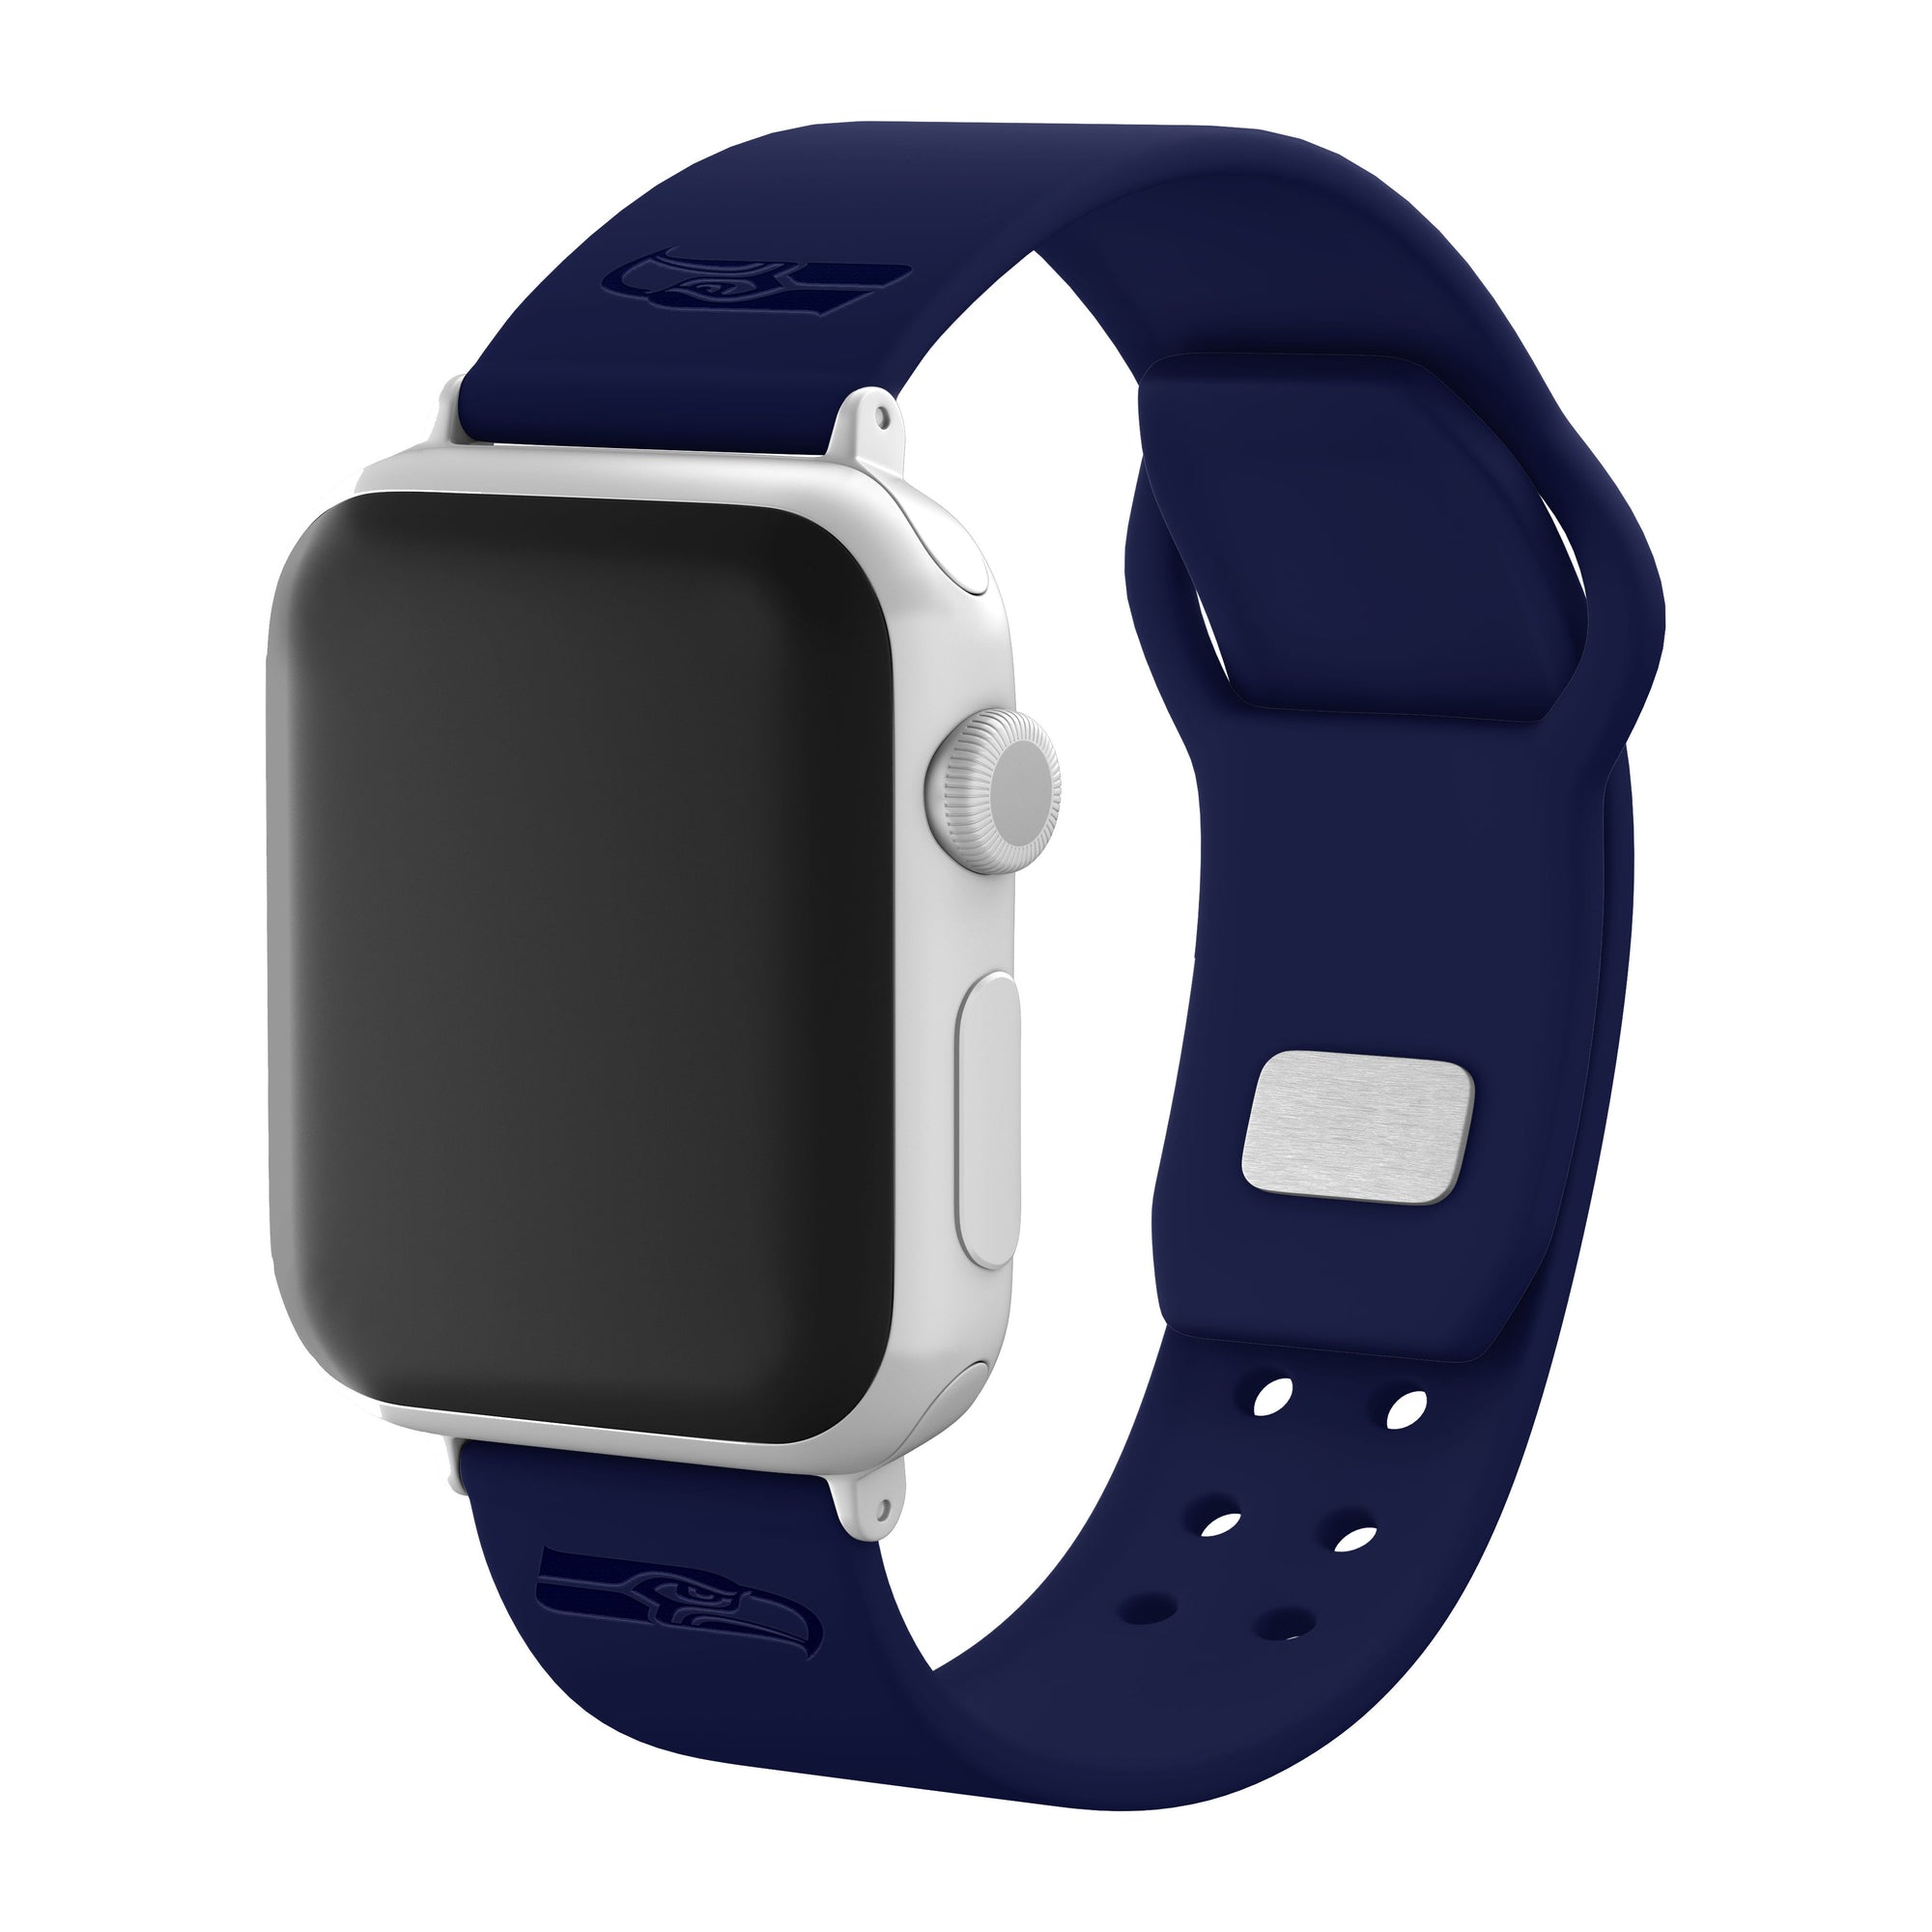 Seattle Seahawks Engraved Silicone 'Slim' Apple Watch Band